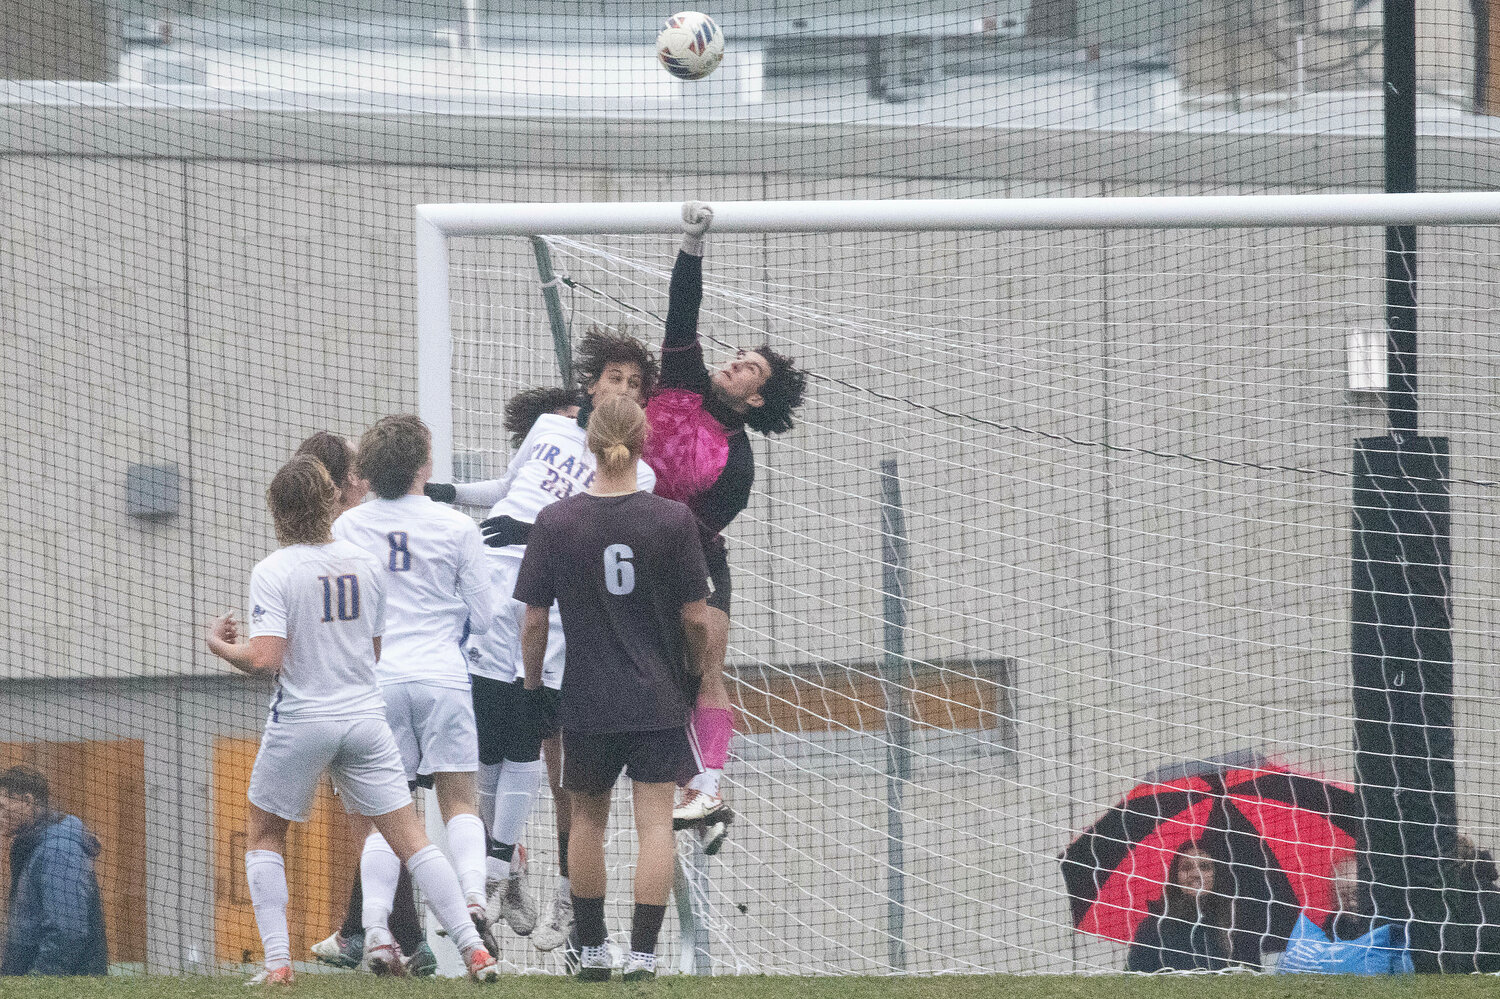 Goalkeeper Noah Amaral fists the ball out of the goal during a Hull corner kick.